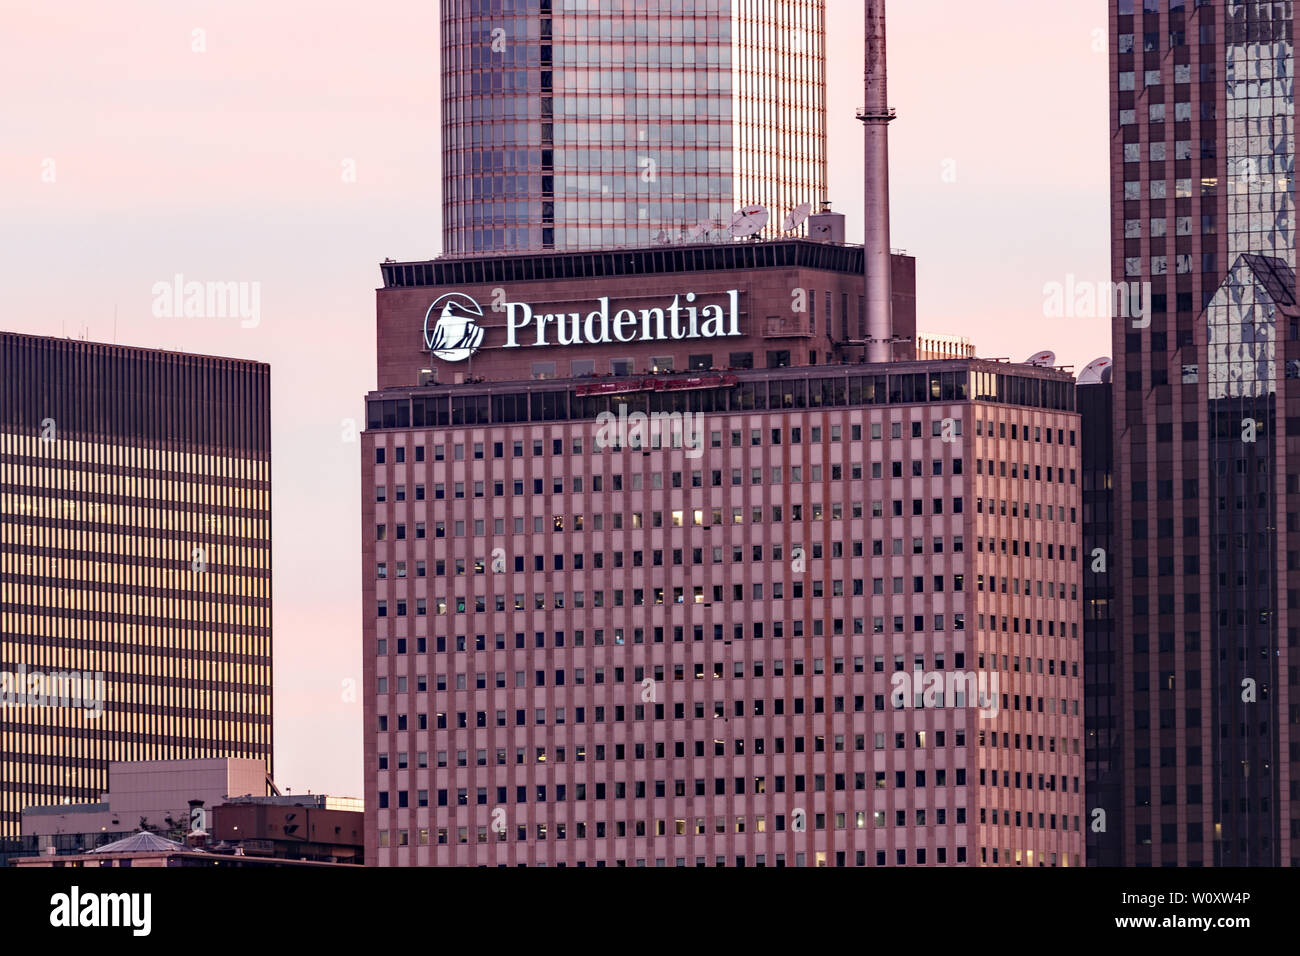 Chicago - Circa June 2019: One Prudential Plaza in downtown. Prudential is reducing greenhouse gas emissions by installing solar panels and LED lightb Stock Photo